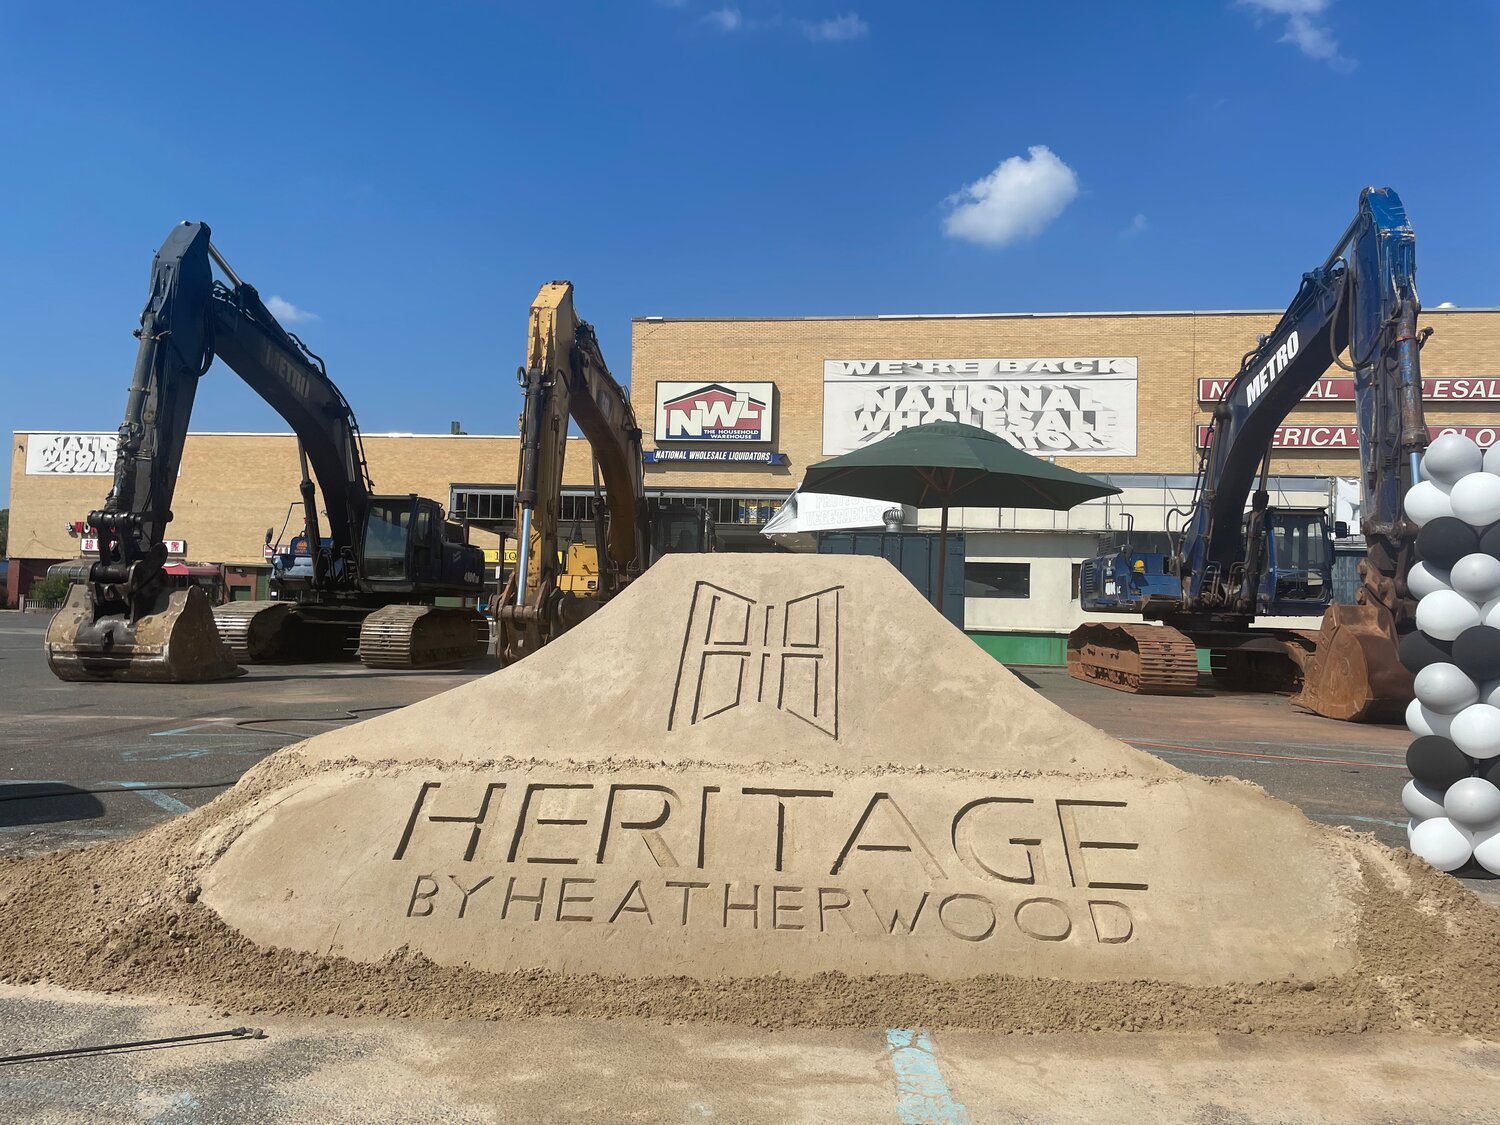 A sand sculpture commemorates the official groundbreaking of a project that Heatherwood, community representatives, and local politicians have worked together on for three years.